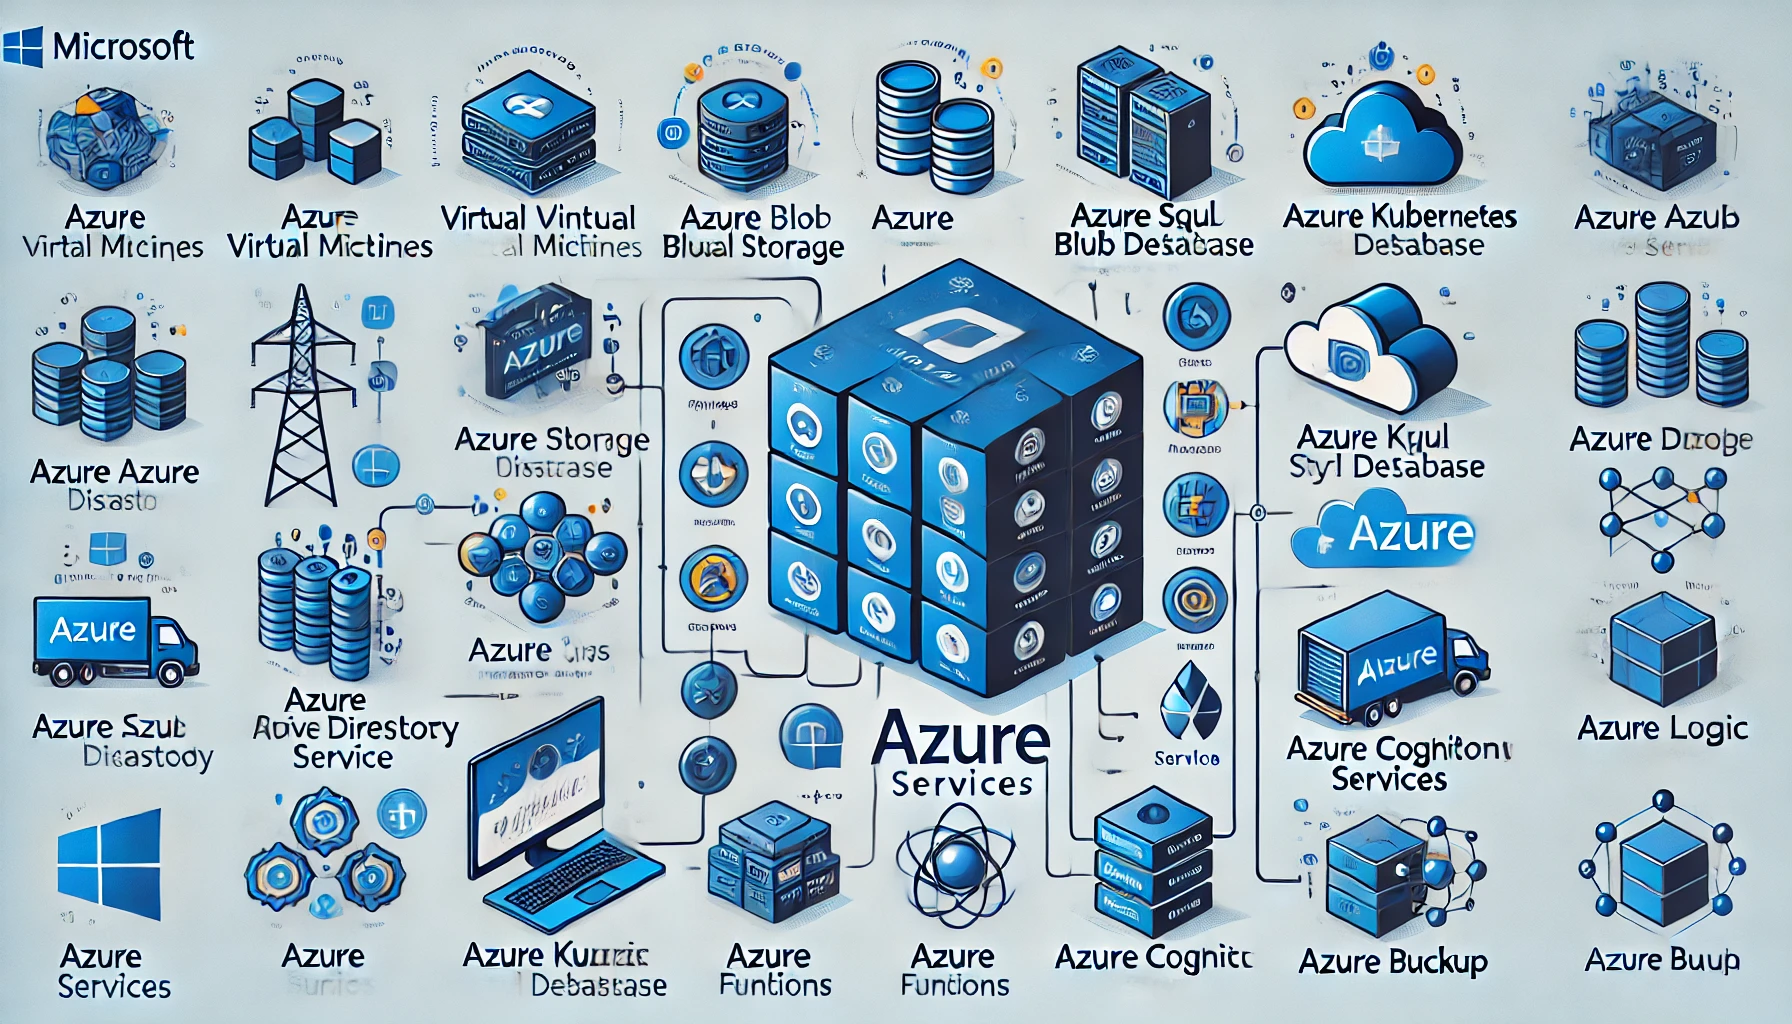 Top 10 Azure Services Every Business Should Use